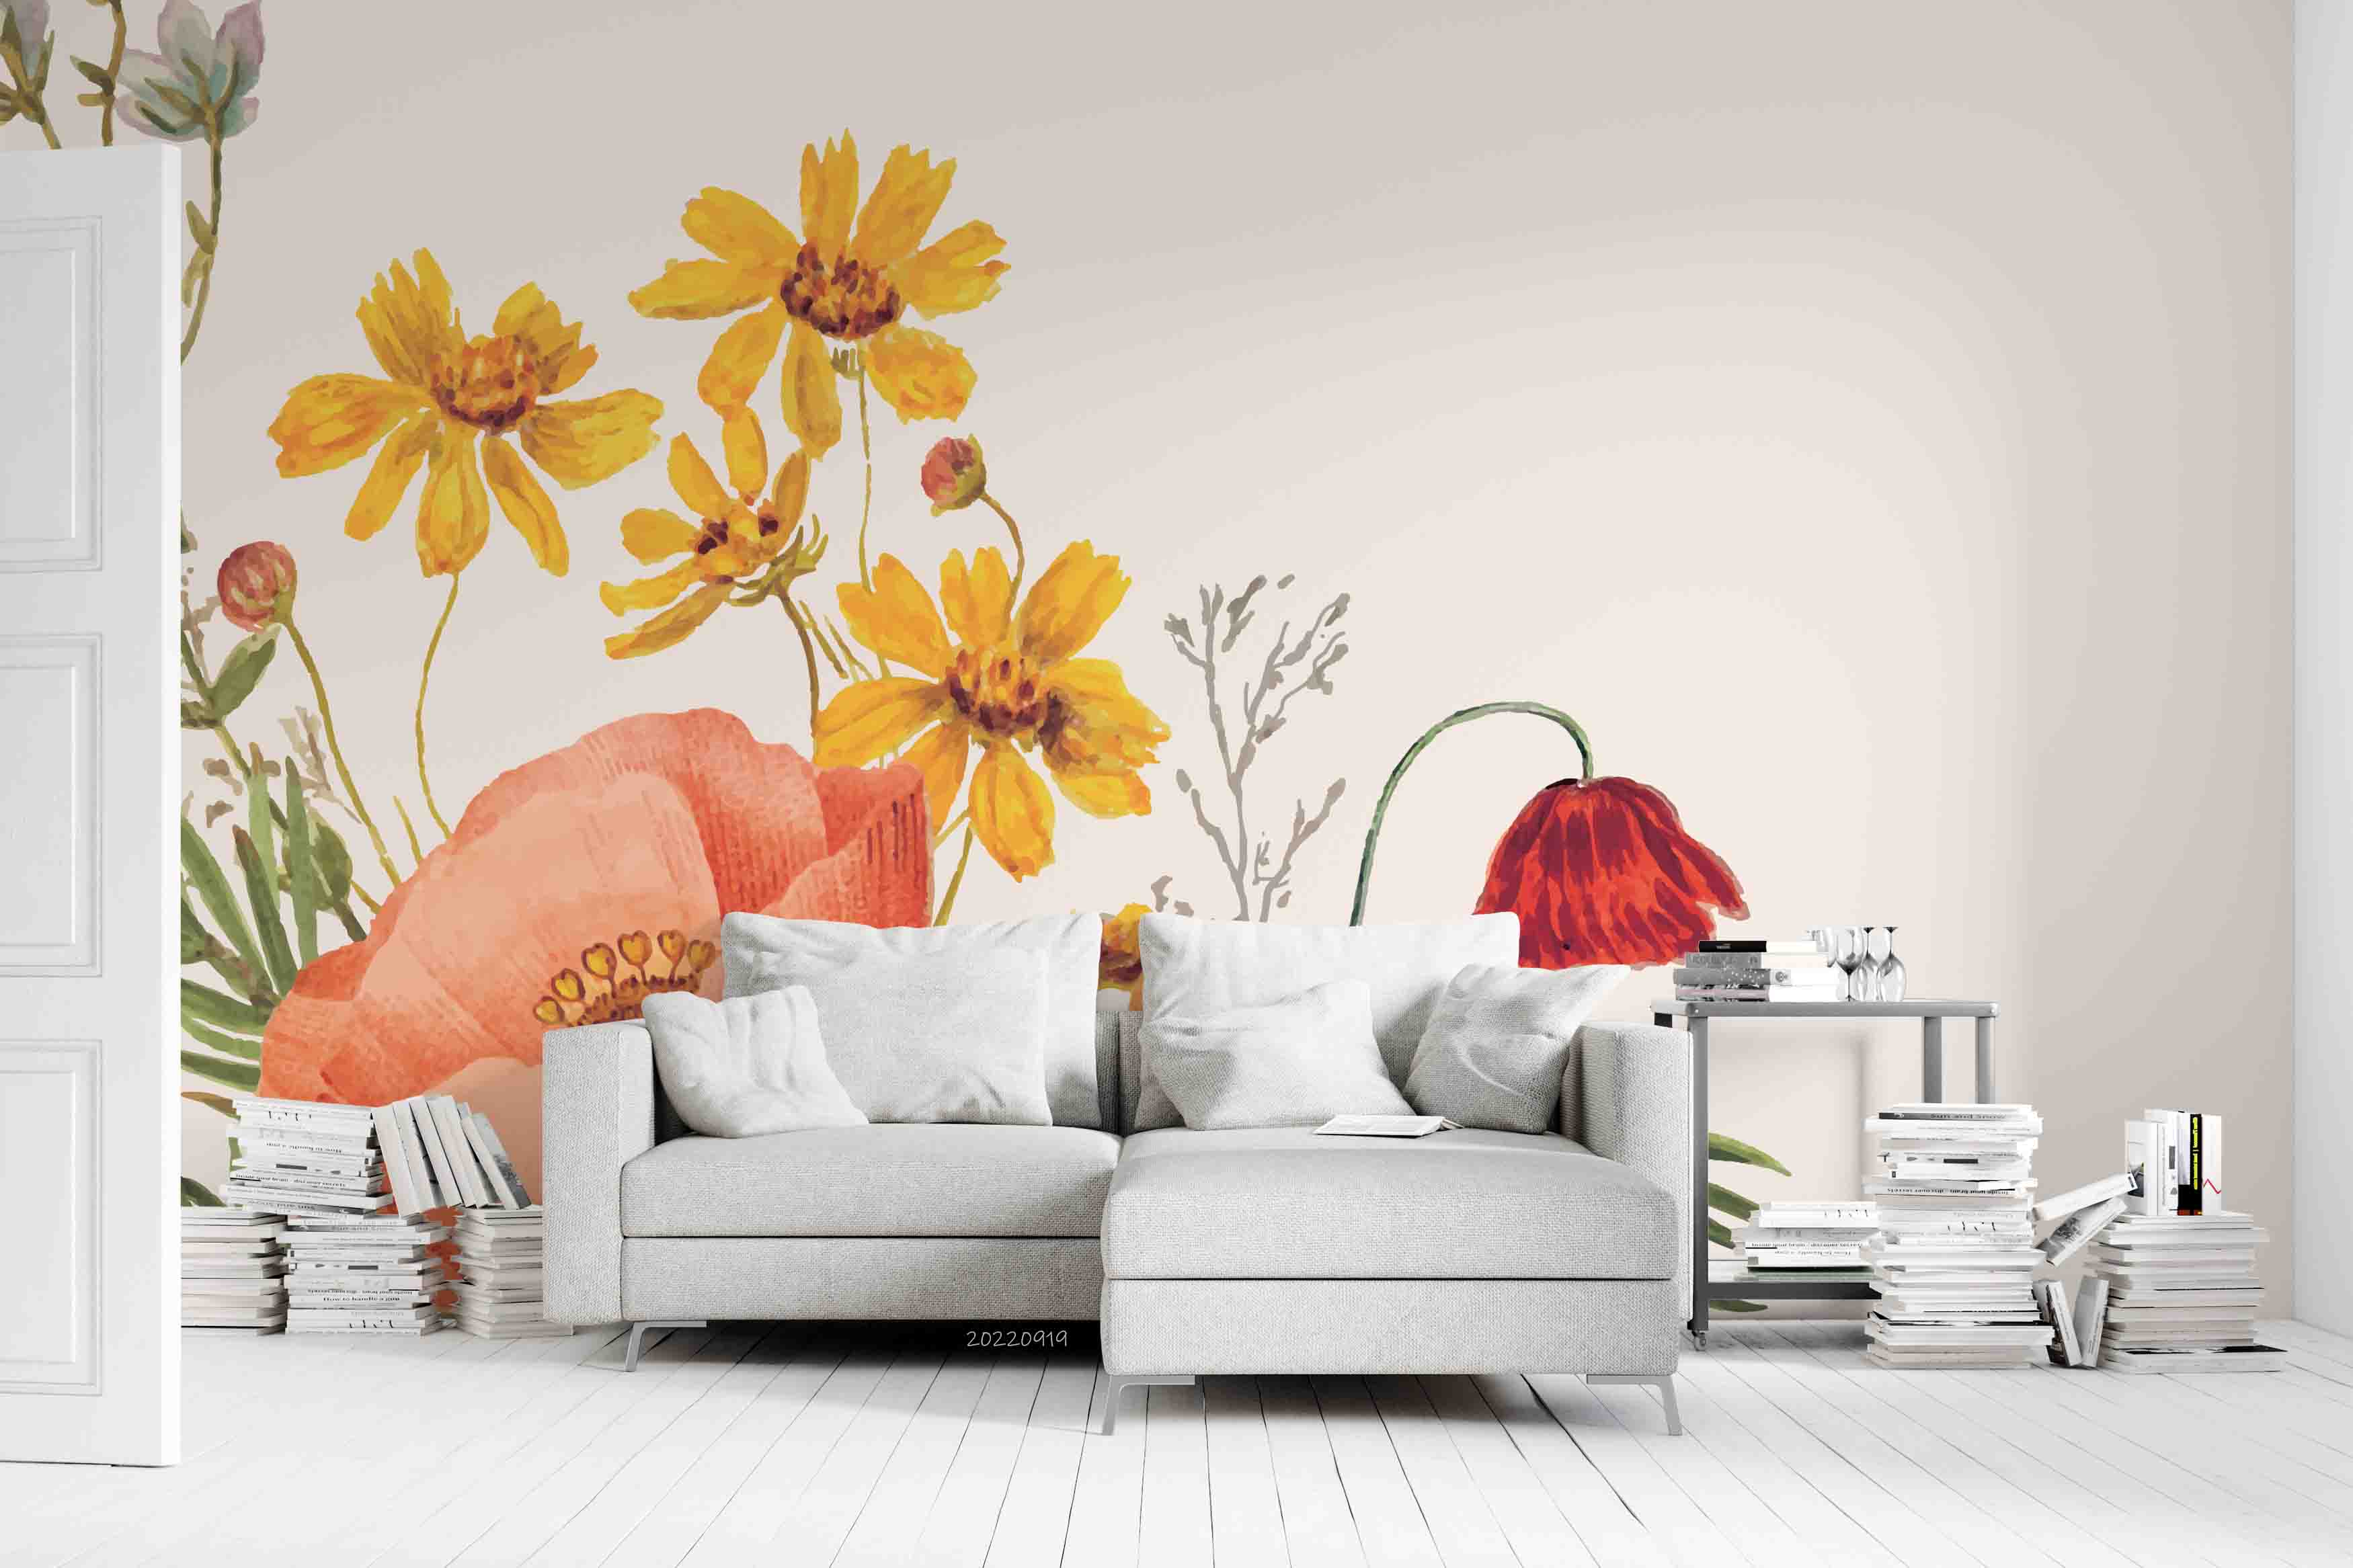 3D Vintage Yellow Floral Background Wall Mural Wallpaper GD 3424- Jess Art Decoration